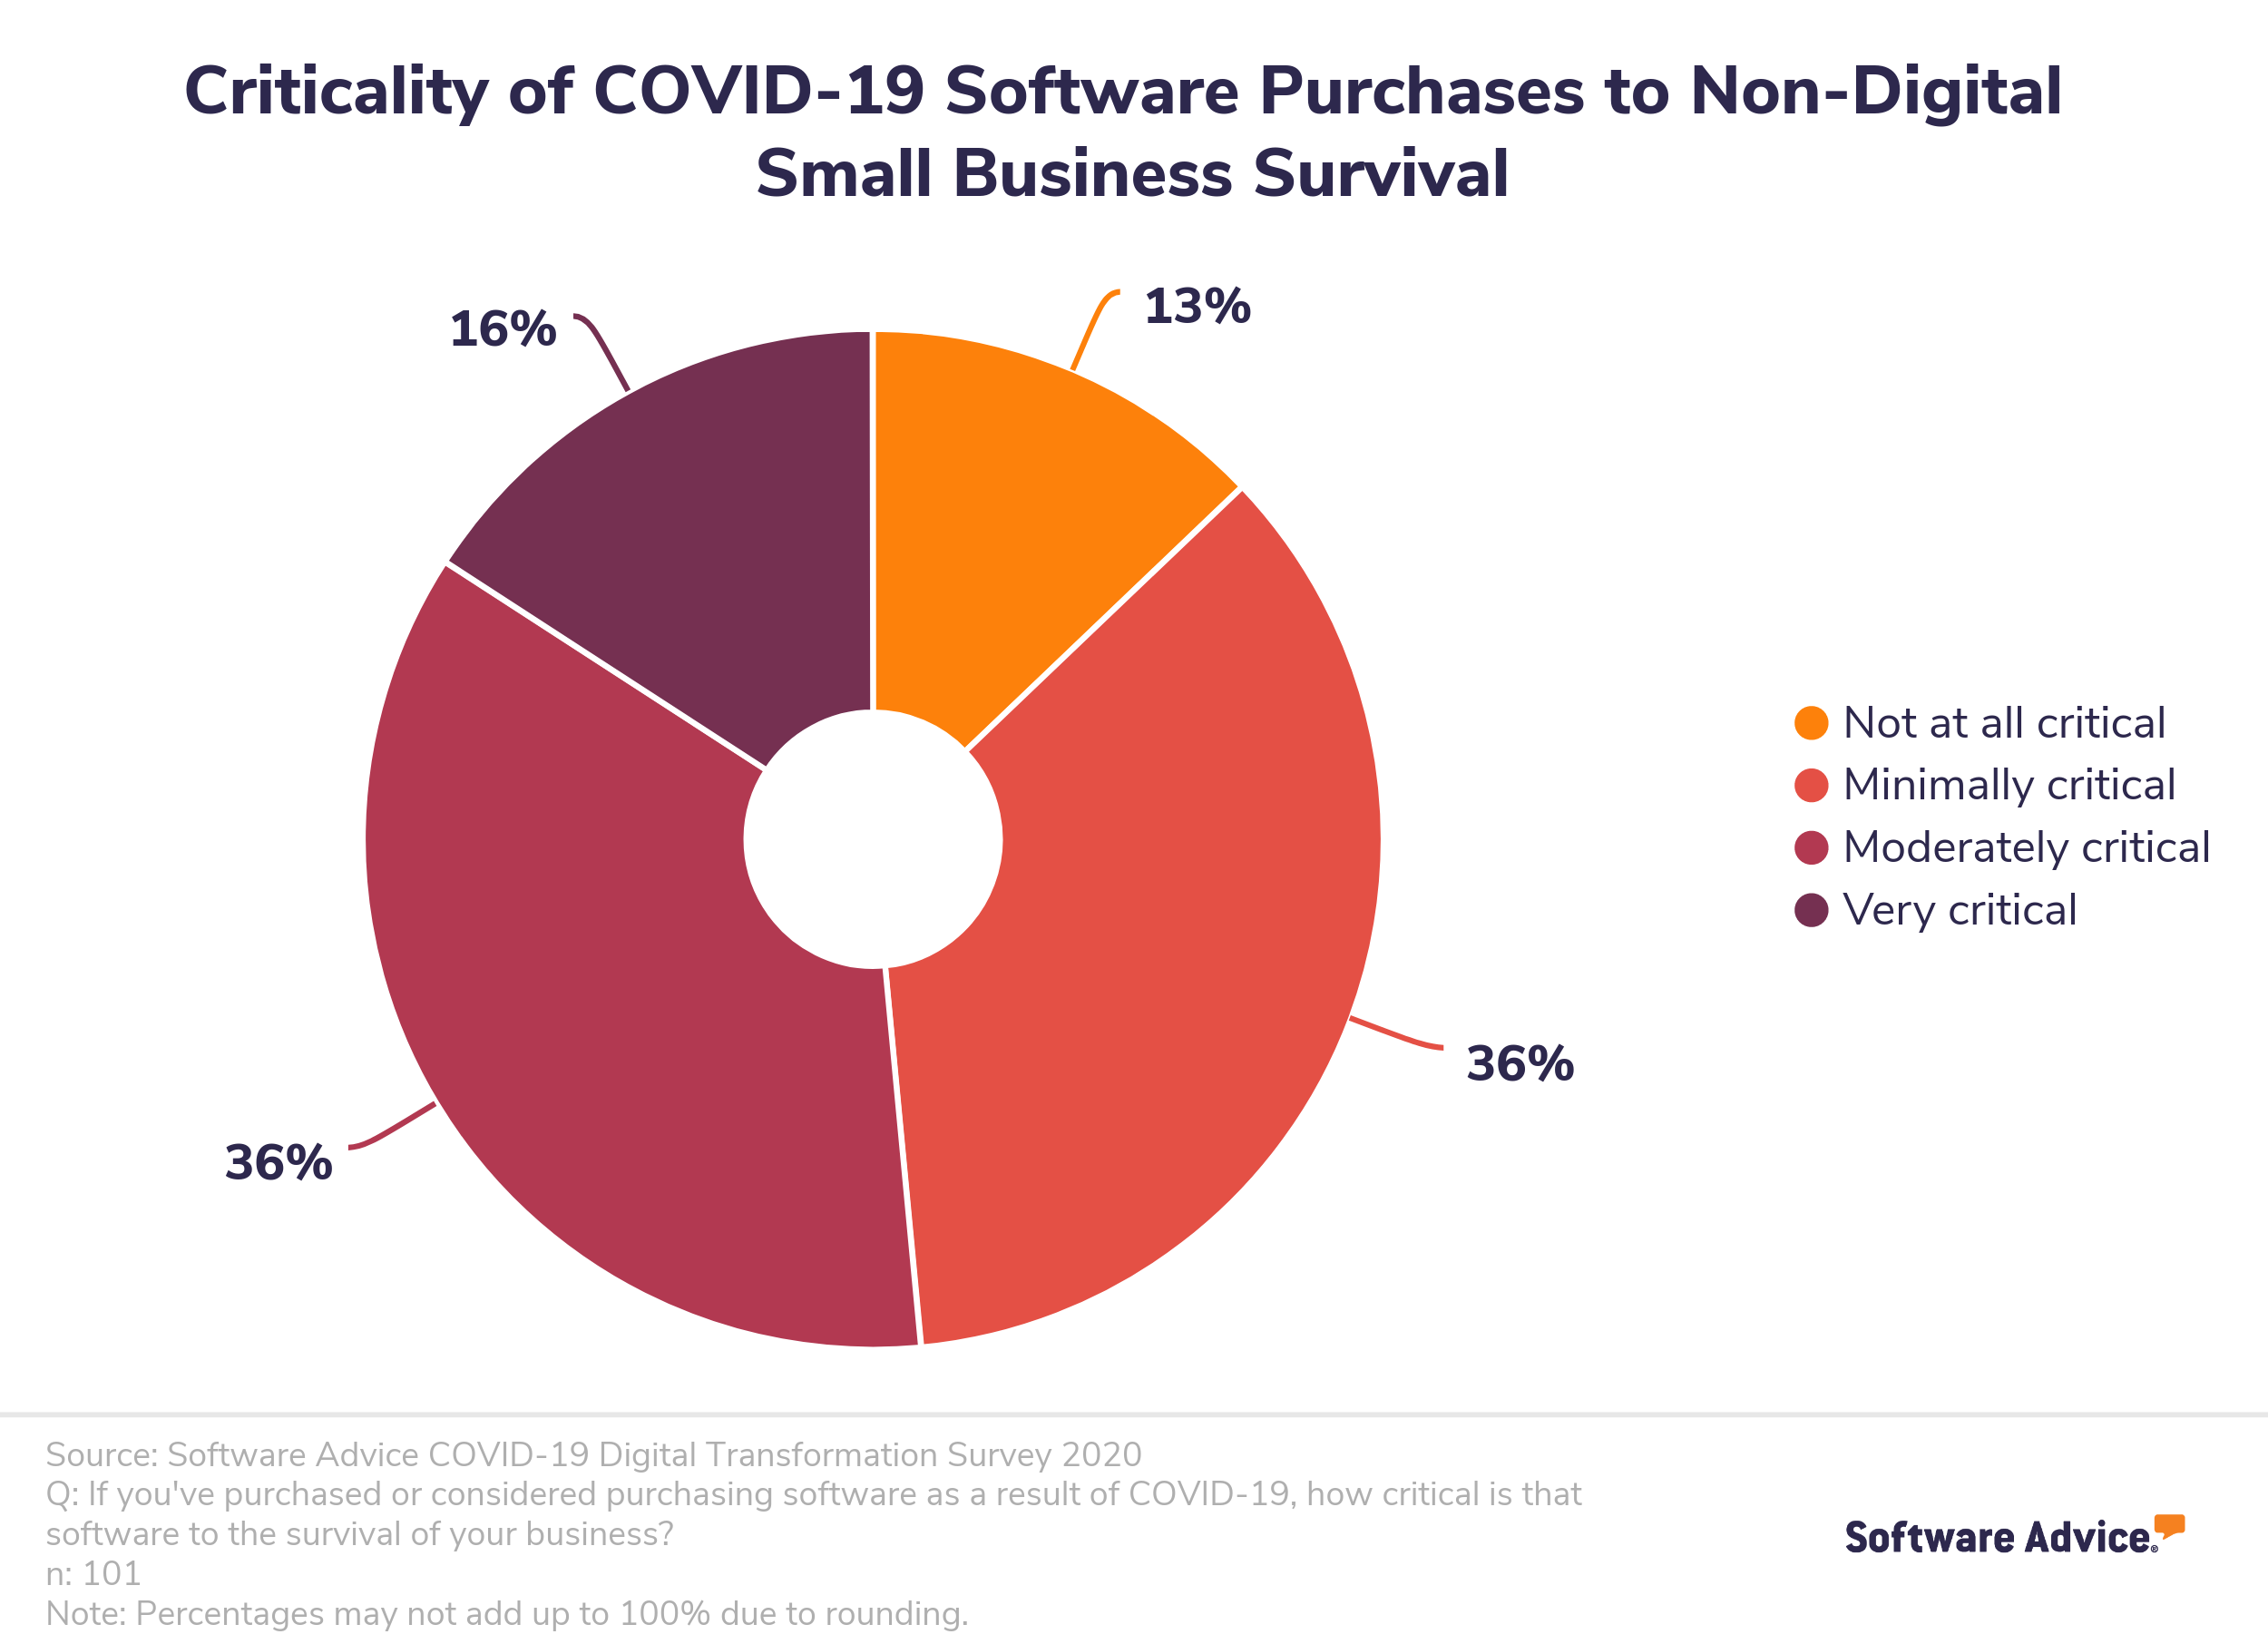 Pie-chart-showing-how-critical-software-purchases-are-to-non-digital-small-business-survival-during-COVID-19.